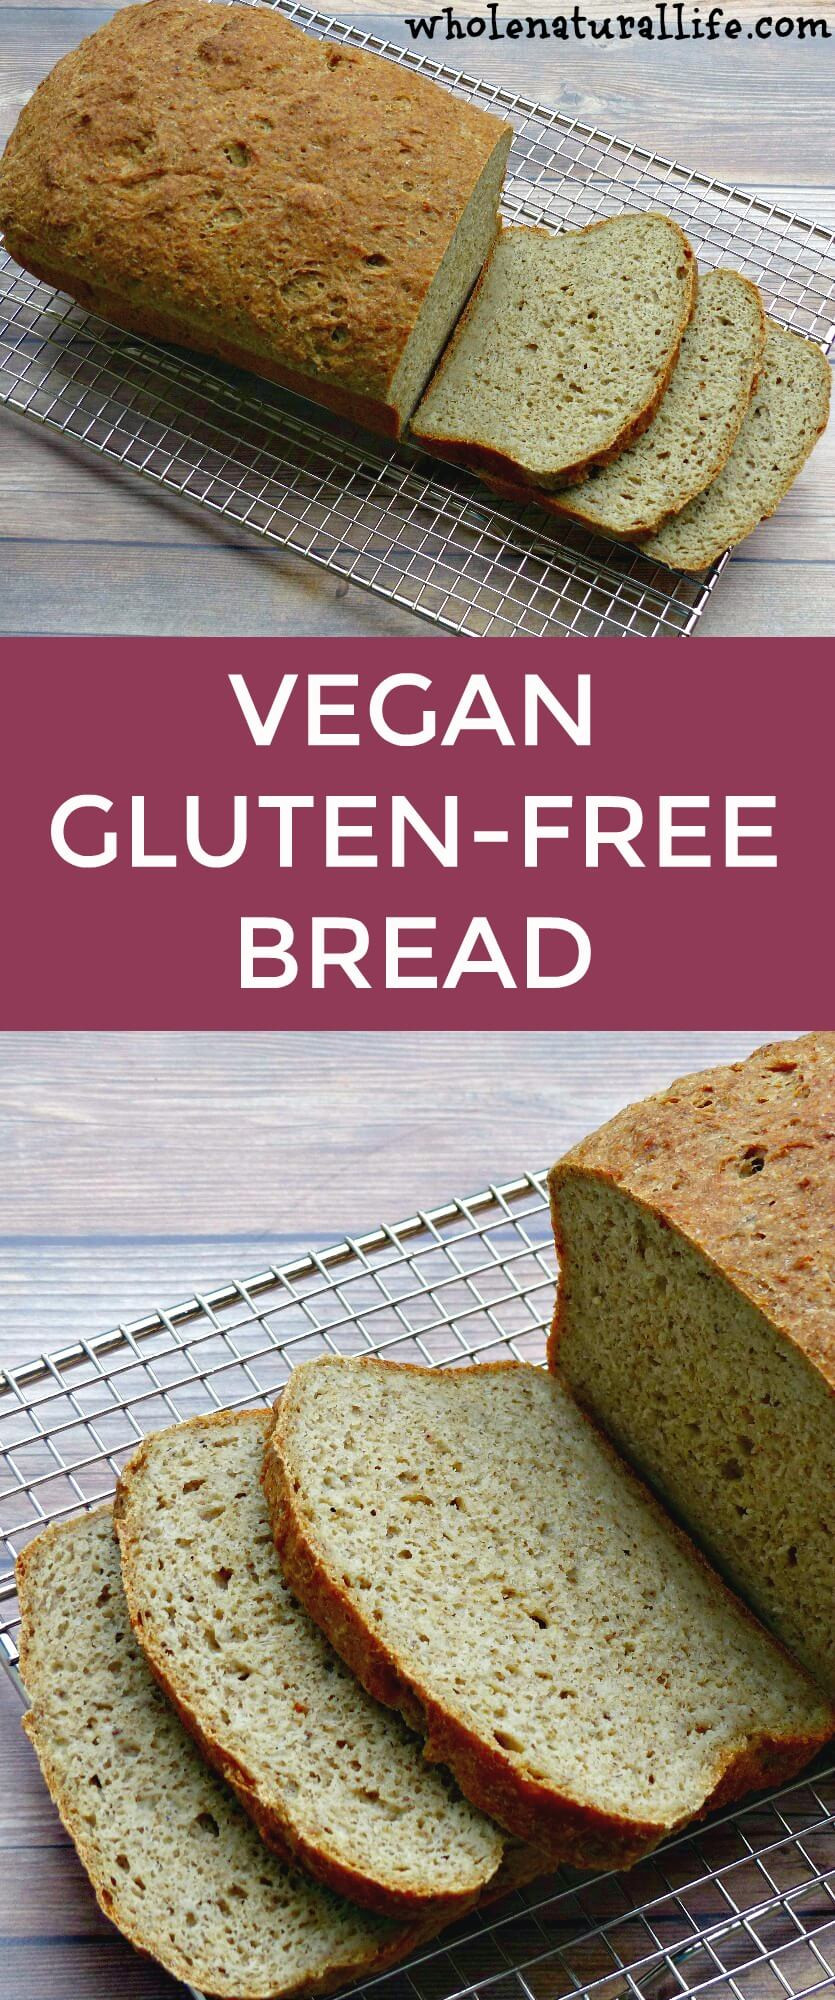 How Is Gluten Free Bread Made
 Vegan Gluten free Bread Whole Natural Life